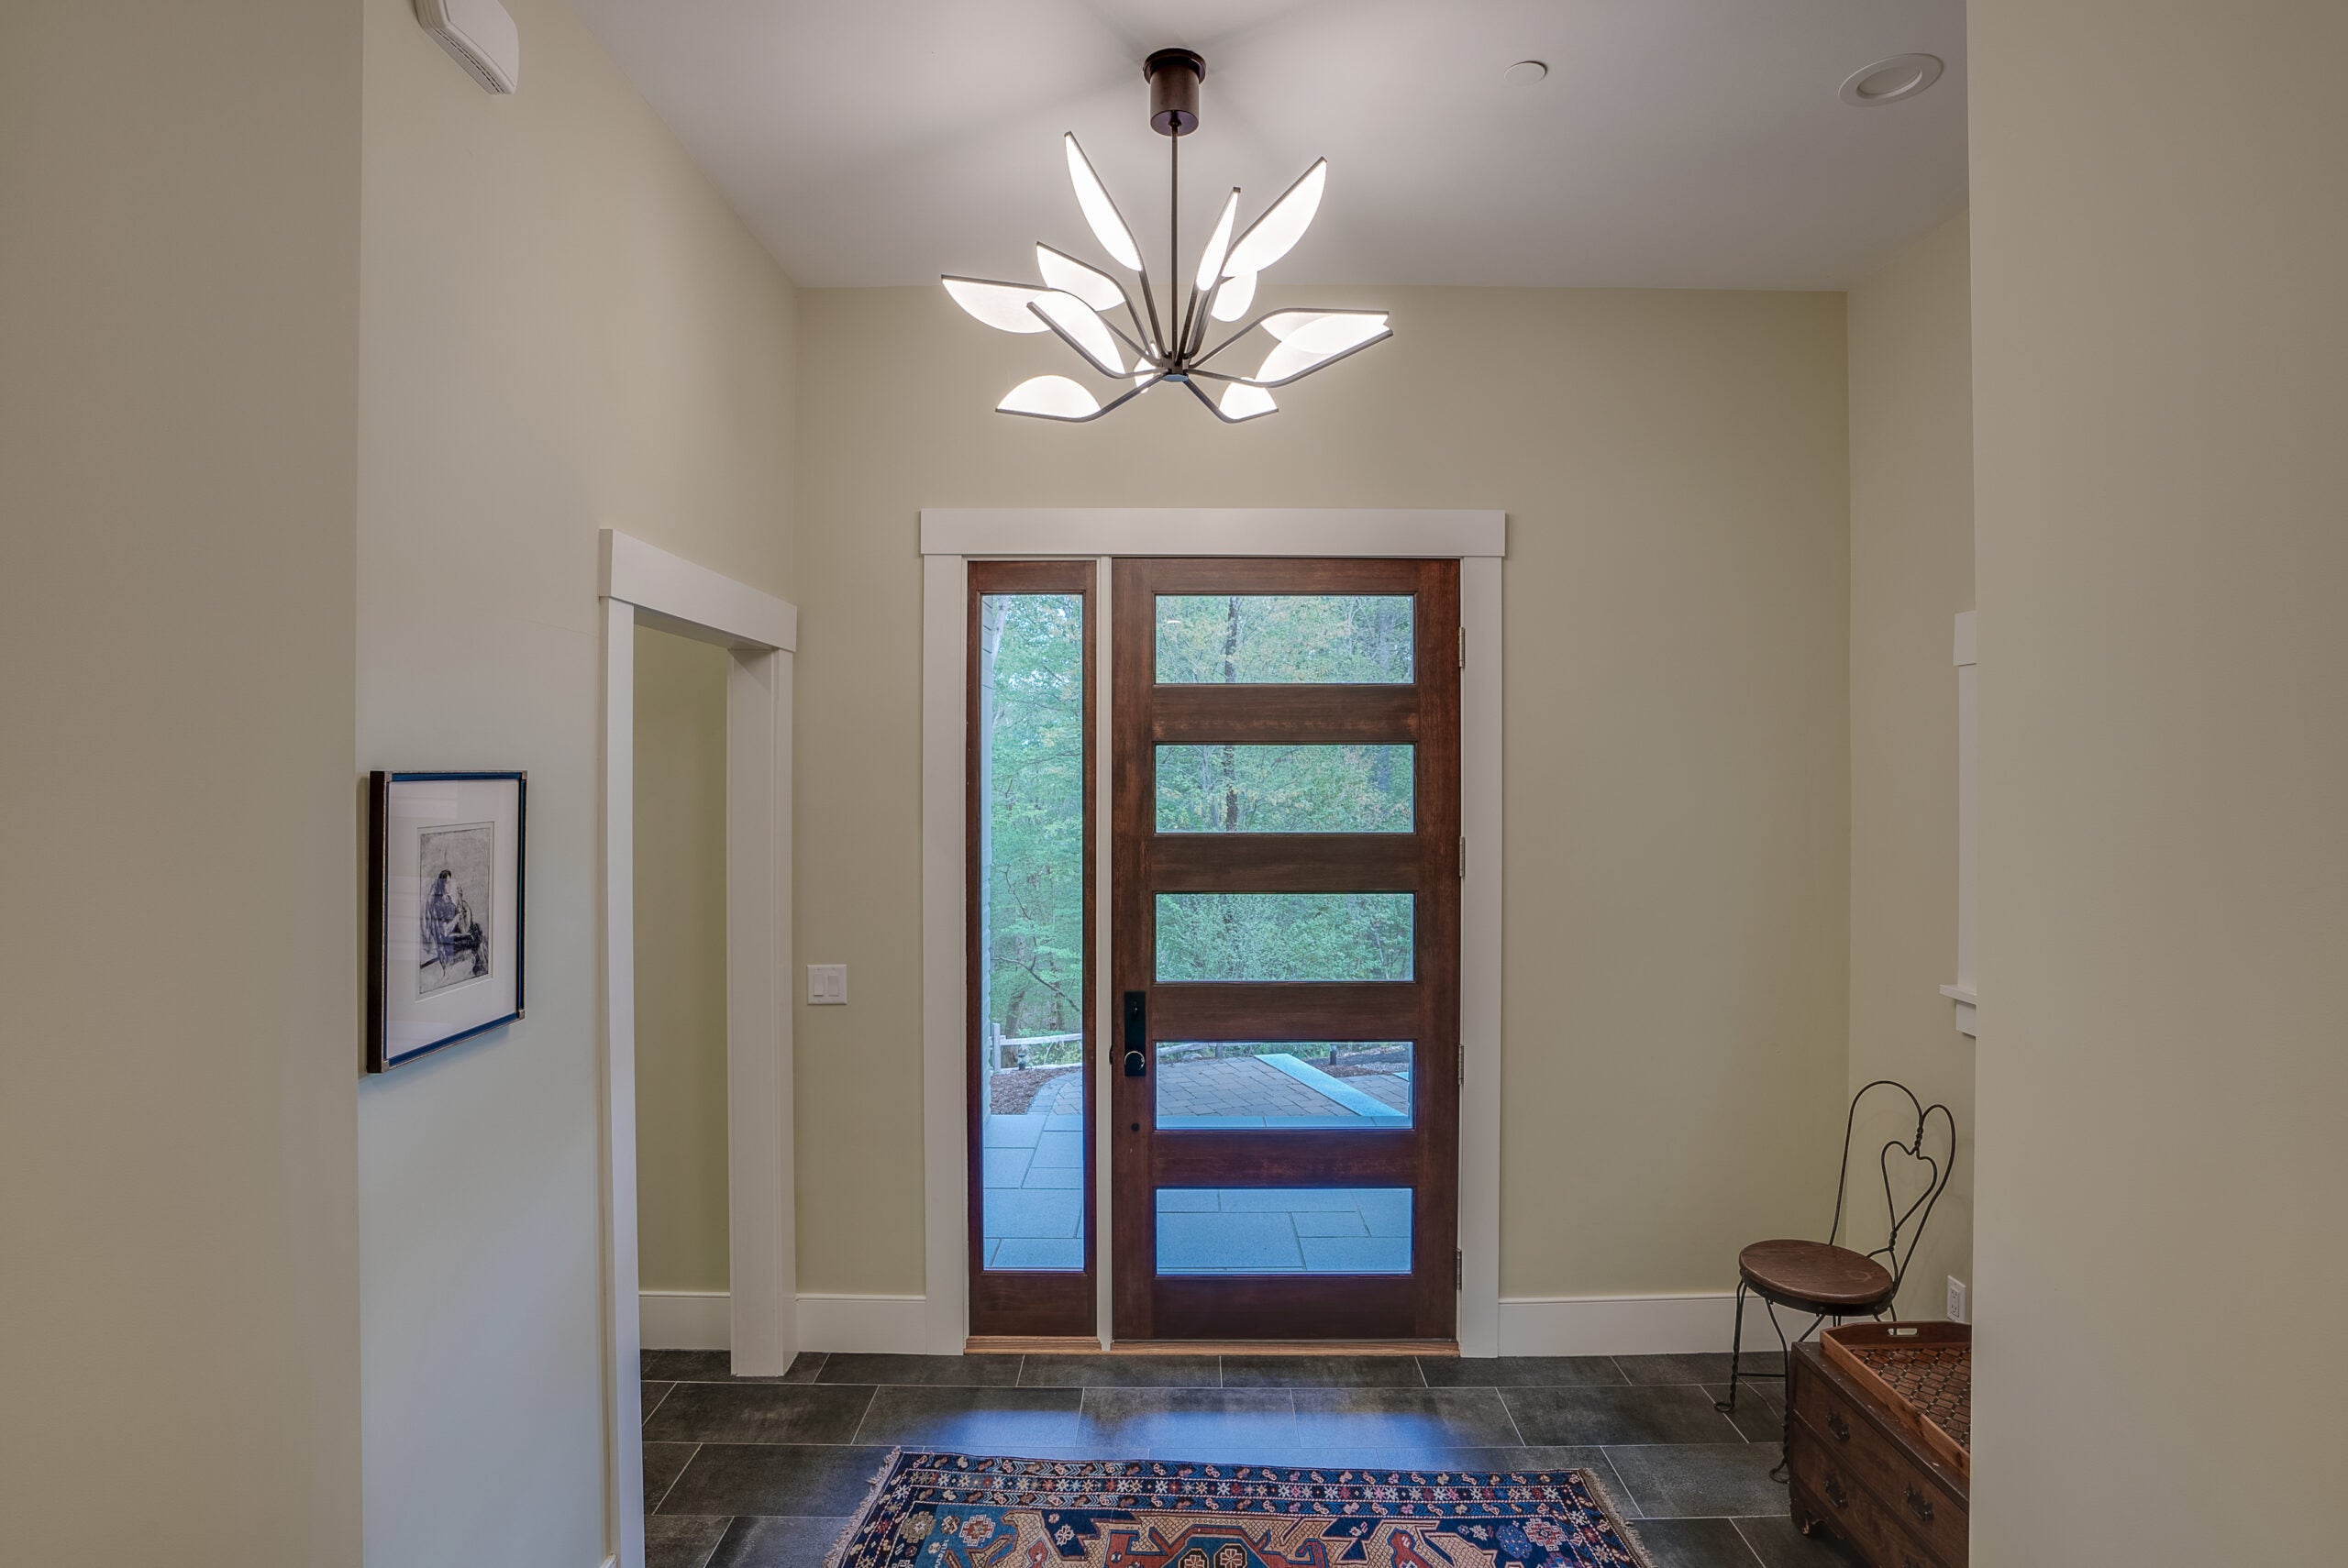 A six-panel wooden door with a sidelight in a foryer with a tile floor and a modern chandelier that looks like a starburst.